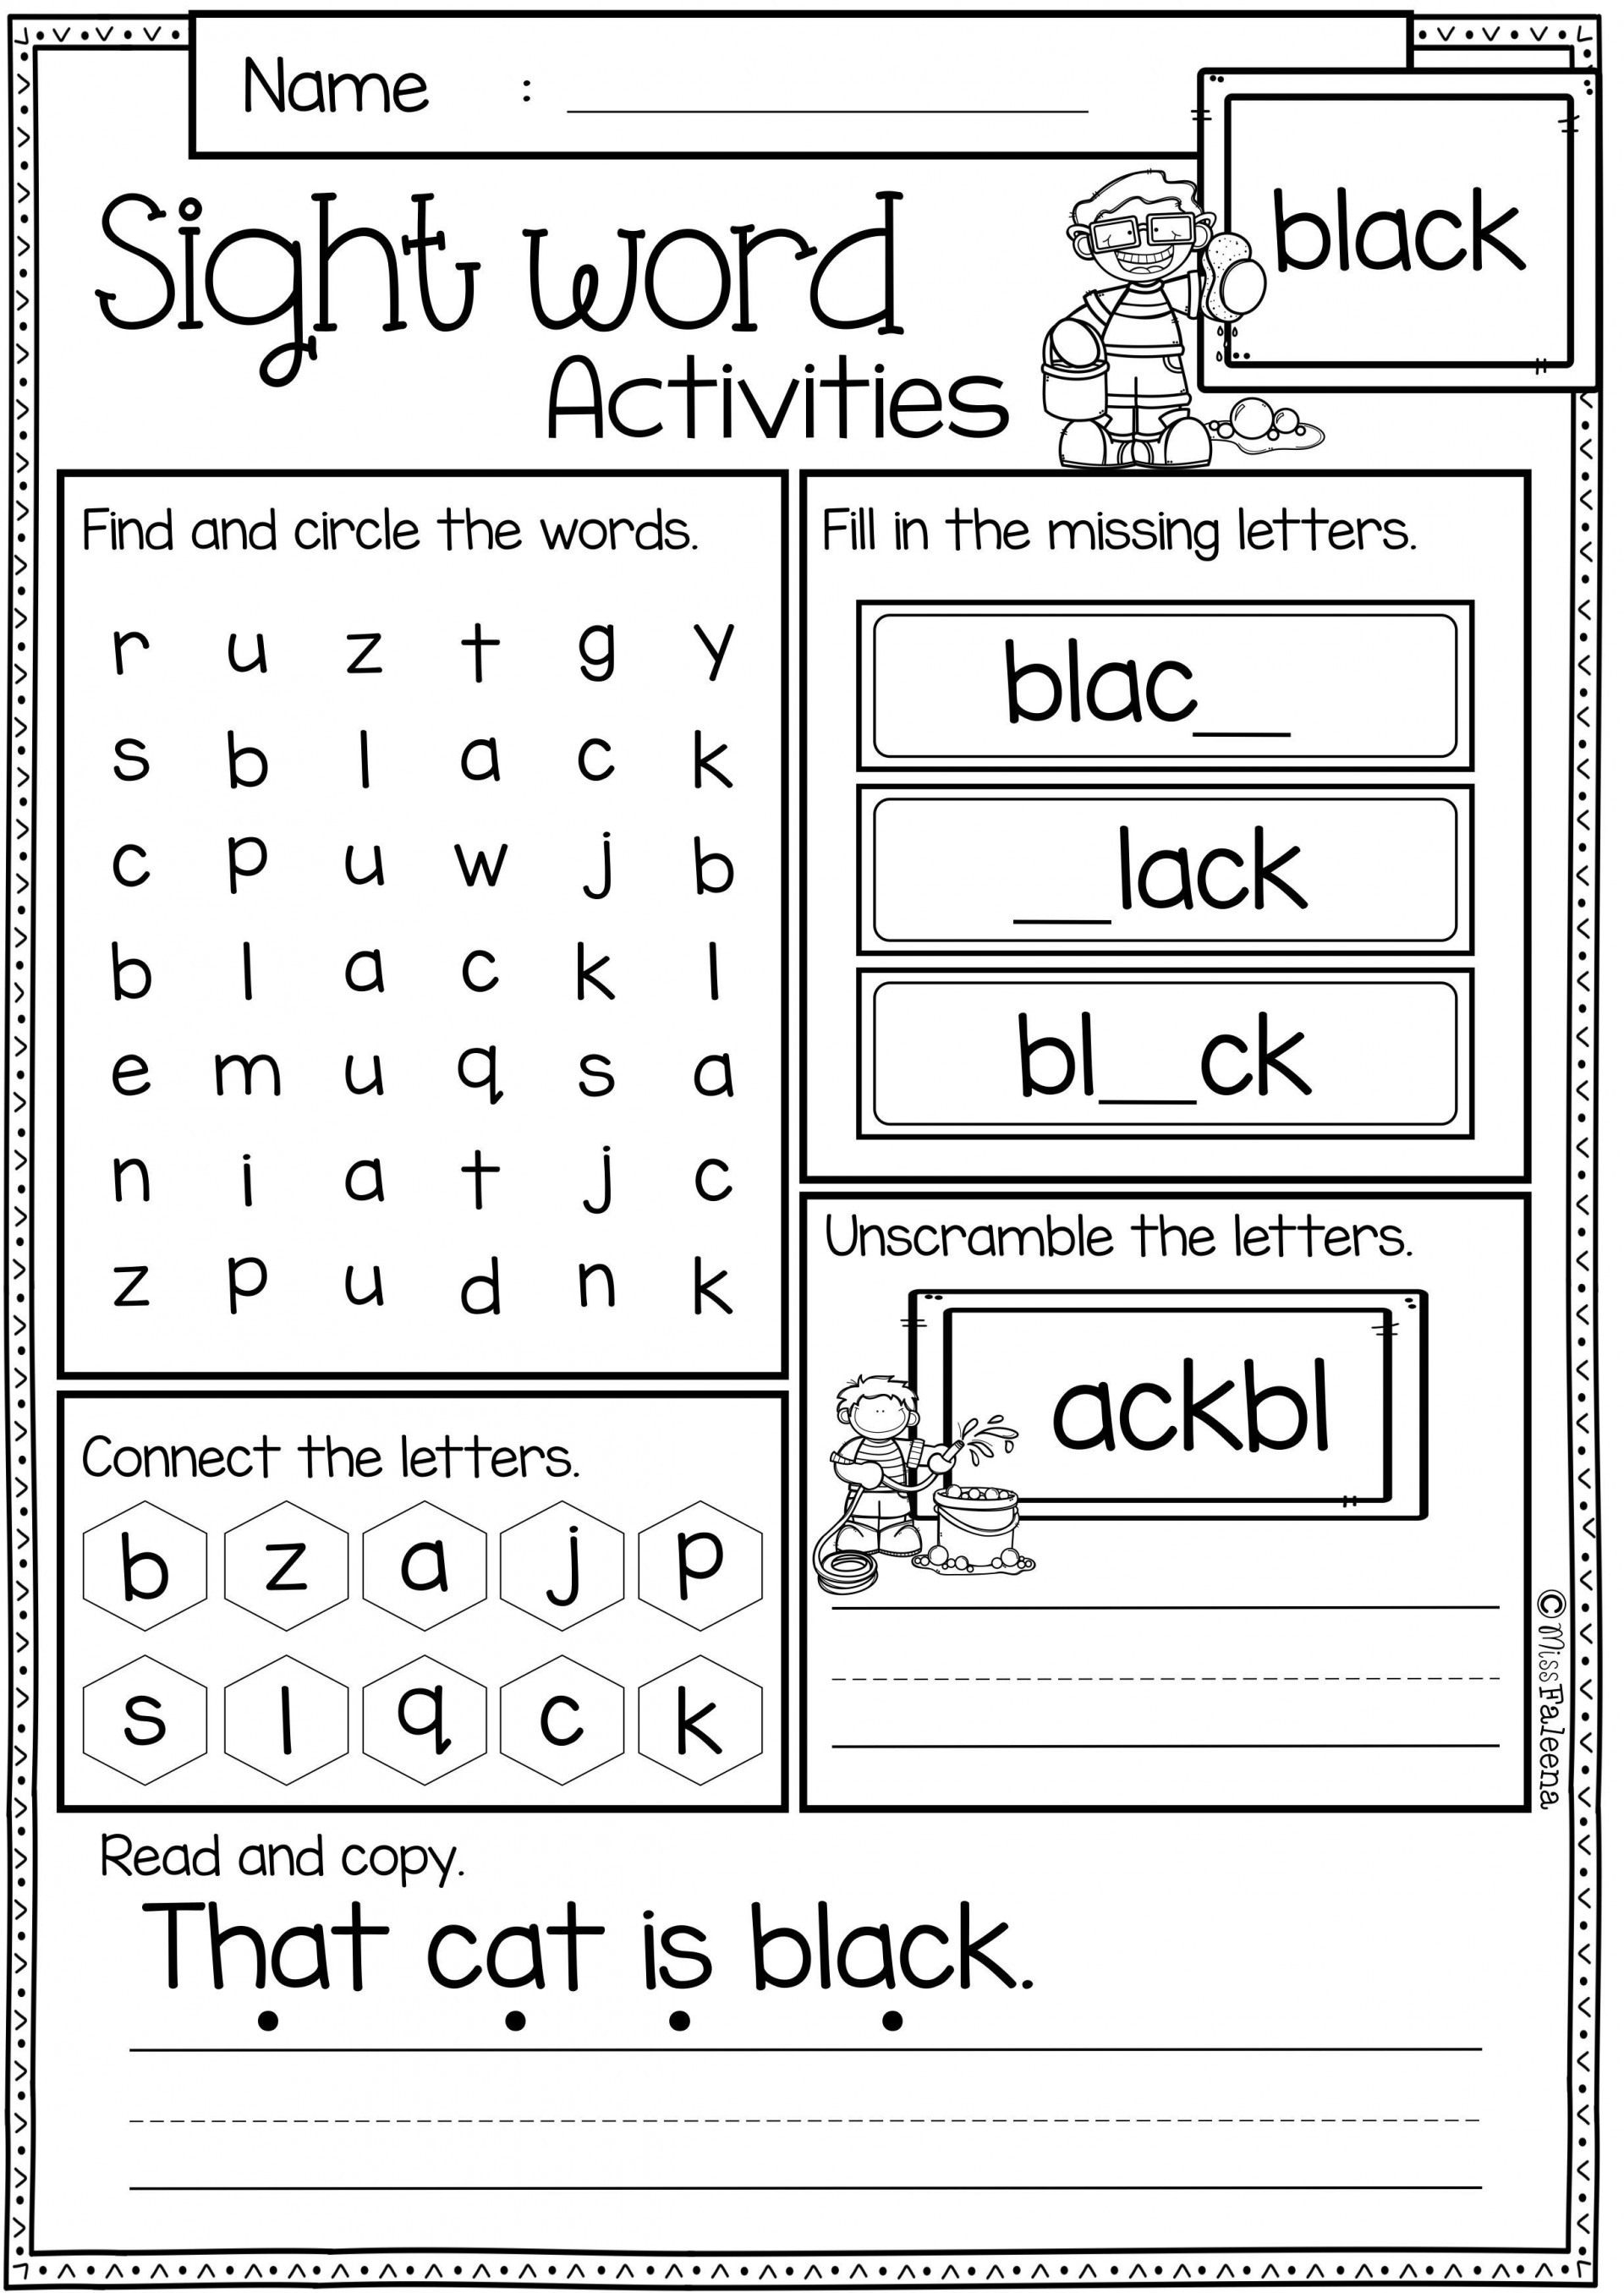 frightening-printable-sight-words-1st-grade-word-song-free-db-excel